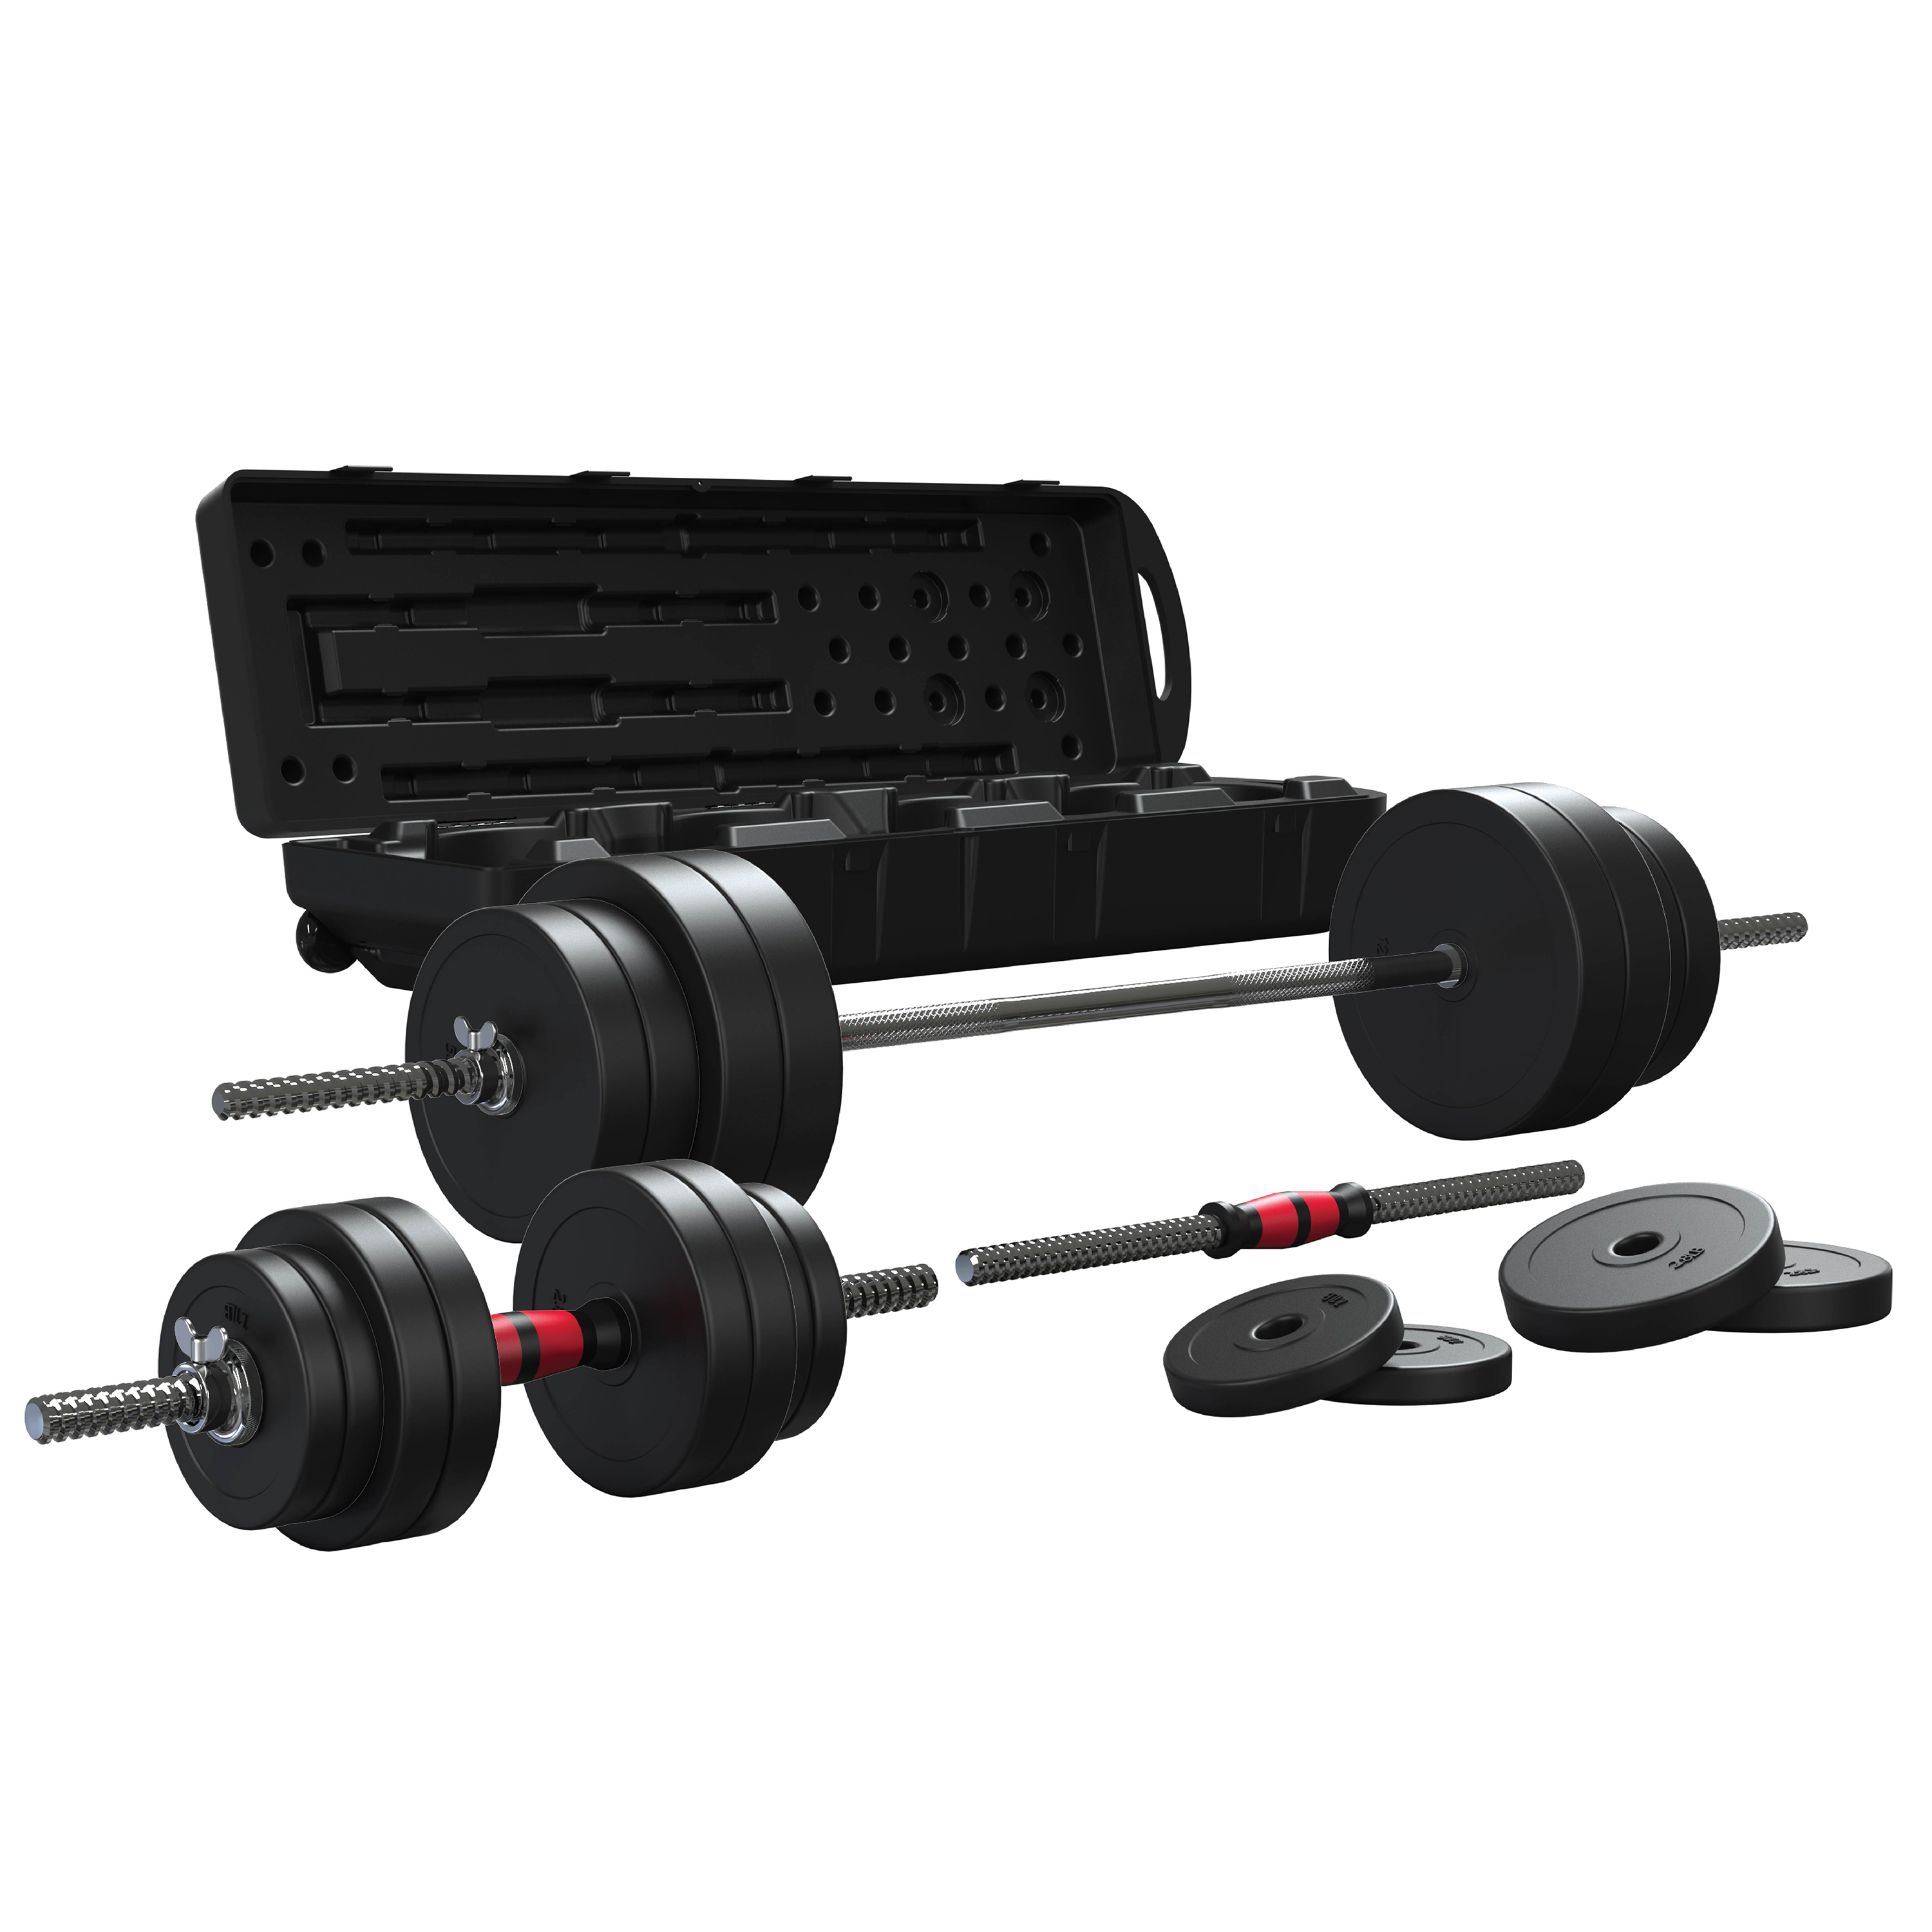 FitRx SmartBell Gym 2-in-1 Barbell & Dumbbell Set, Interchangeable Adjustable Dumbbells and Barbell Weight Set, 100lbs., Black - image 1 of 12